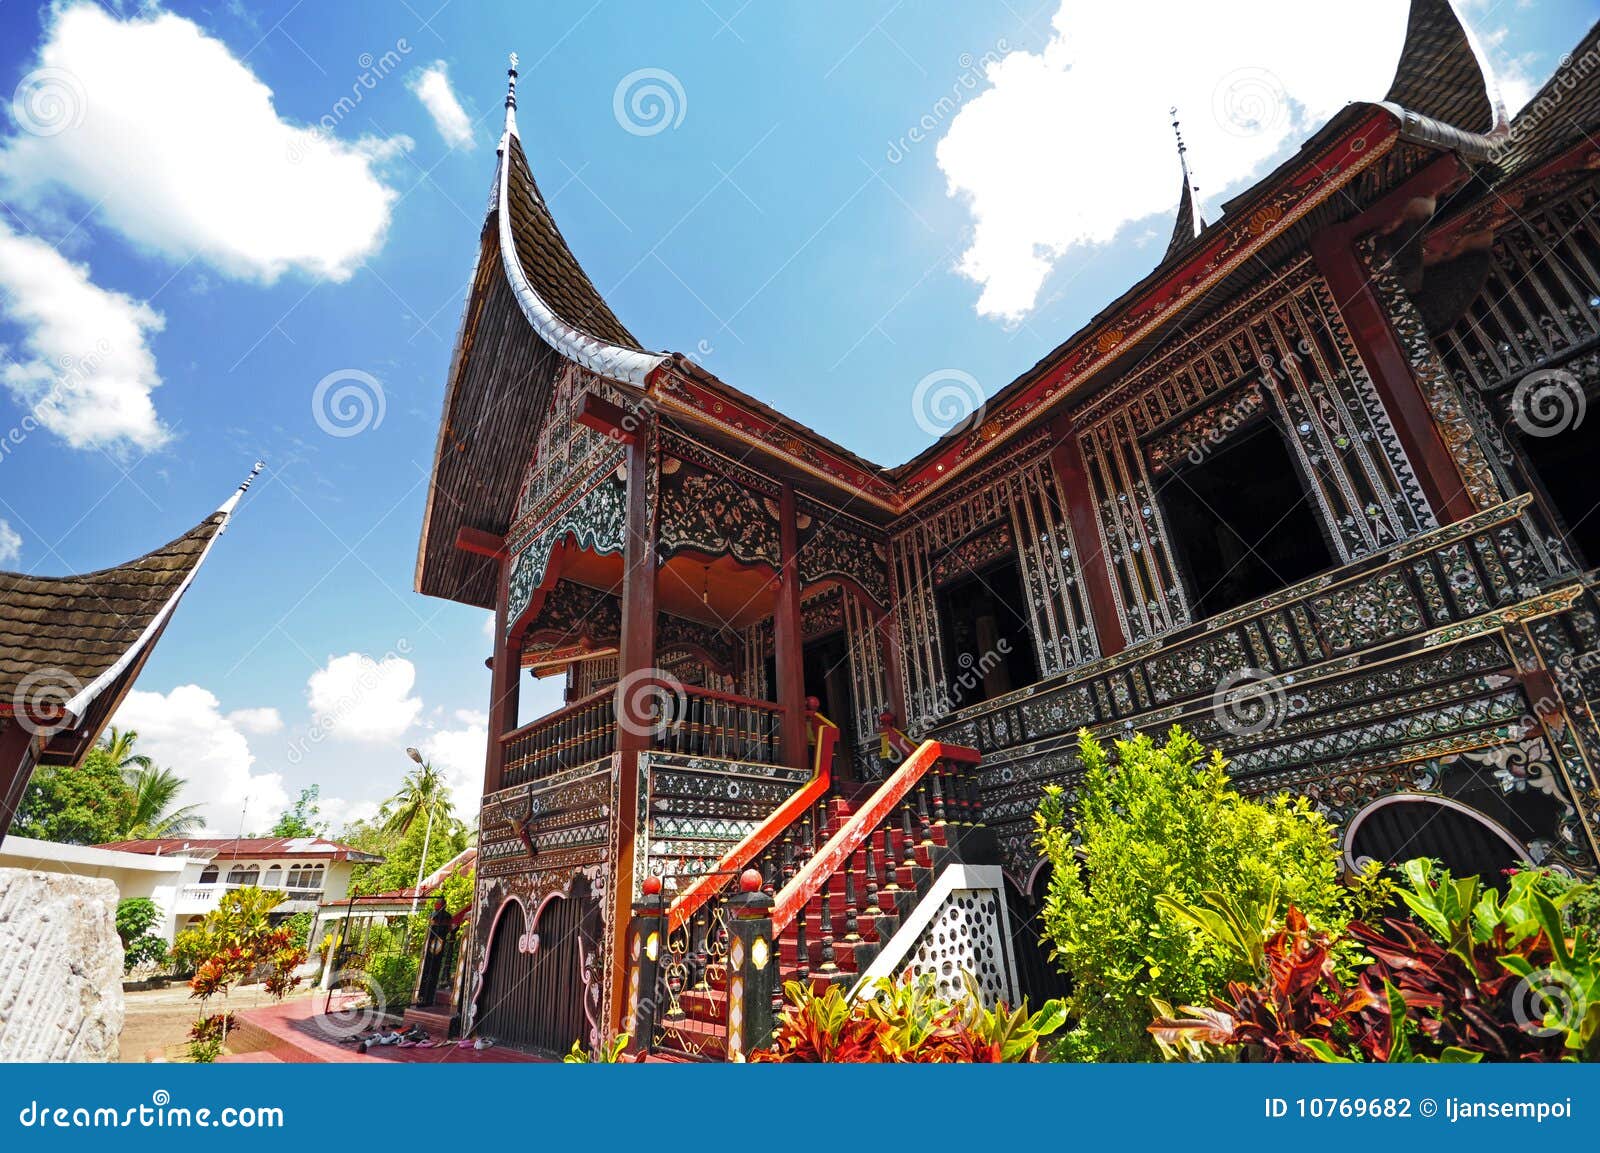 Architecture In Indonesia Stock Photography - Image: 10769682